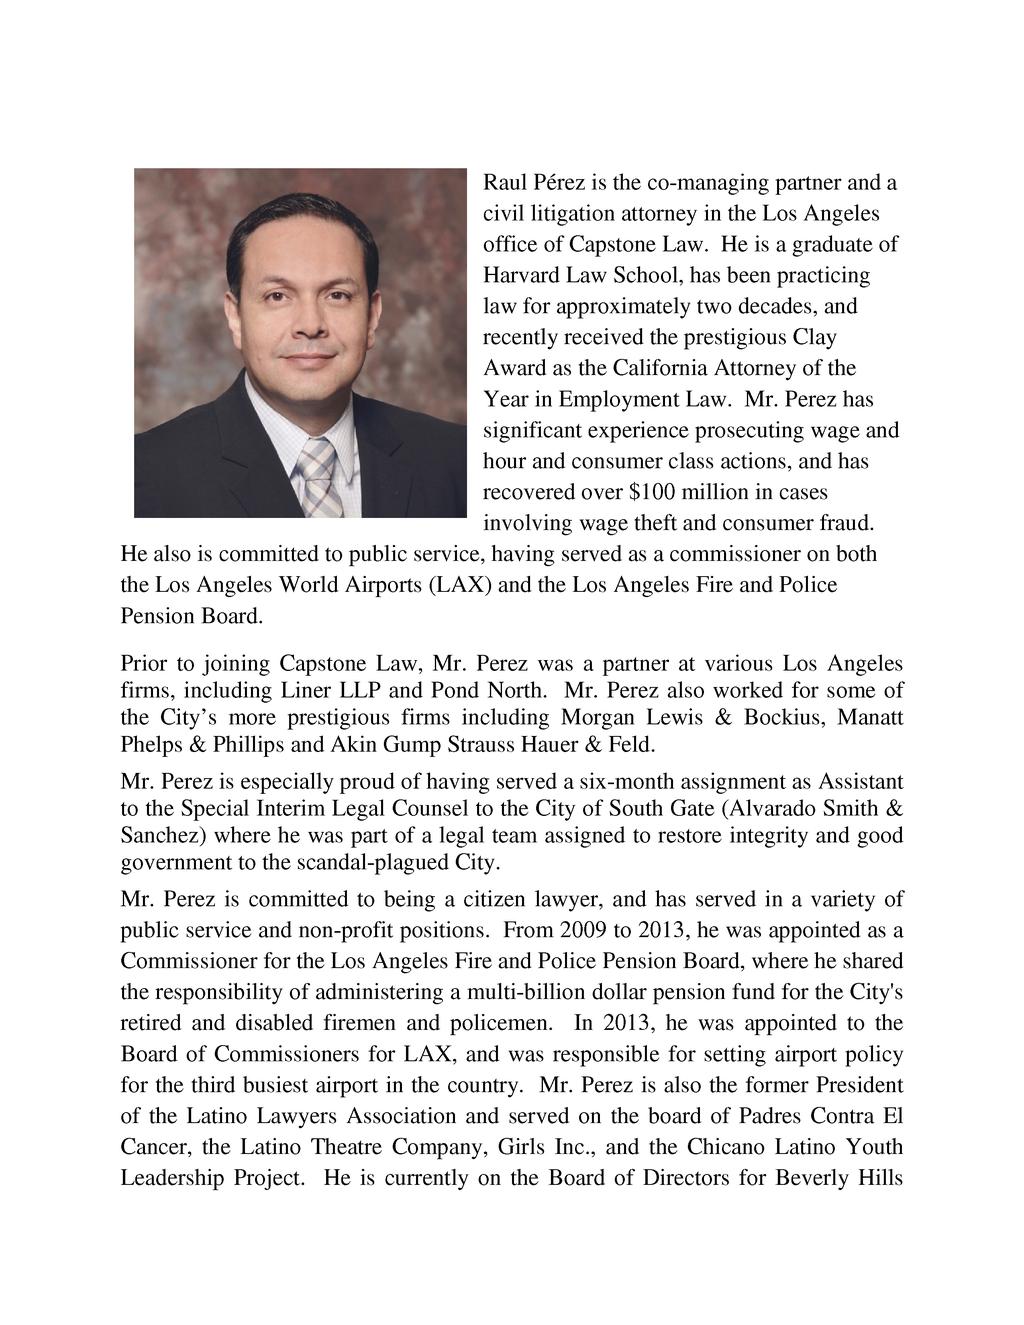 Raul Perez is the co-managing partner and a civil litigation attorney in the Los Angeles office of Capstone Law.